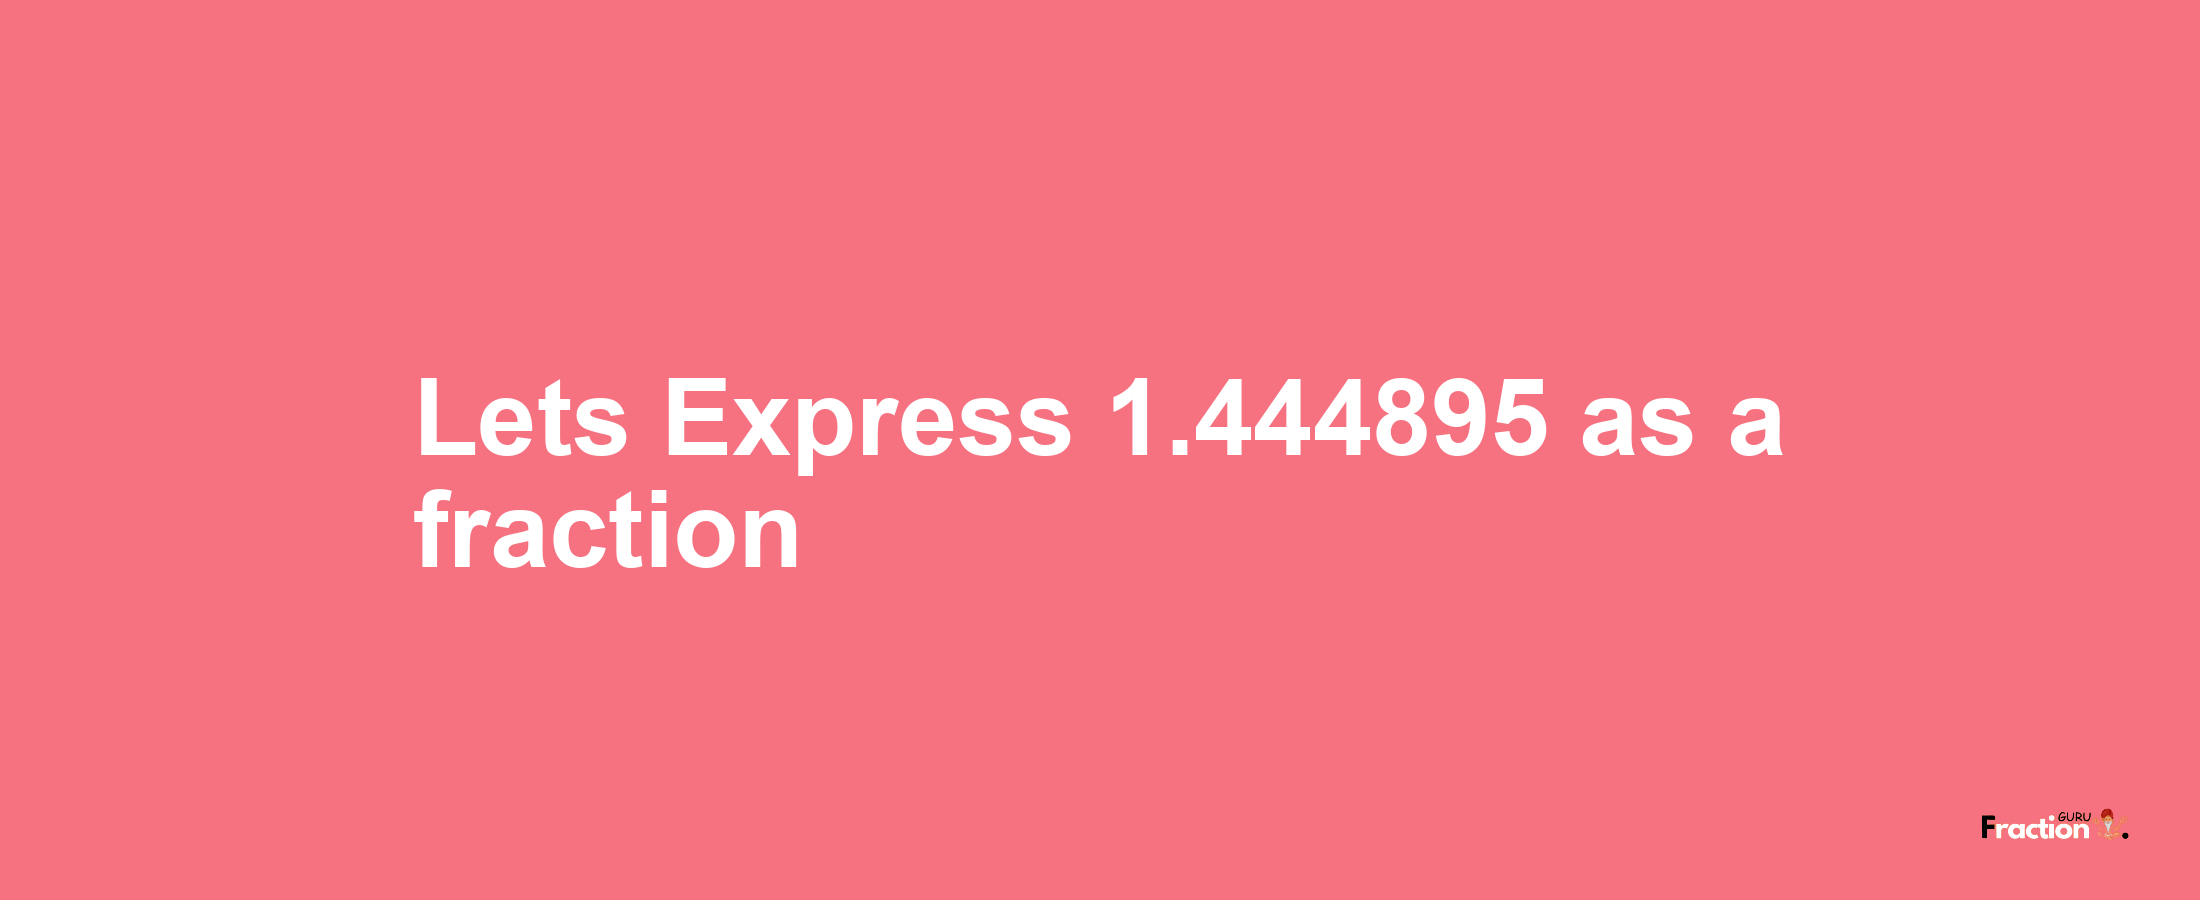 Lets Express 1.444895 as afraction